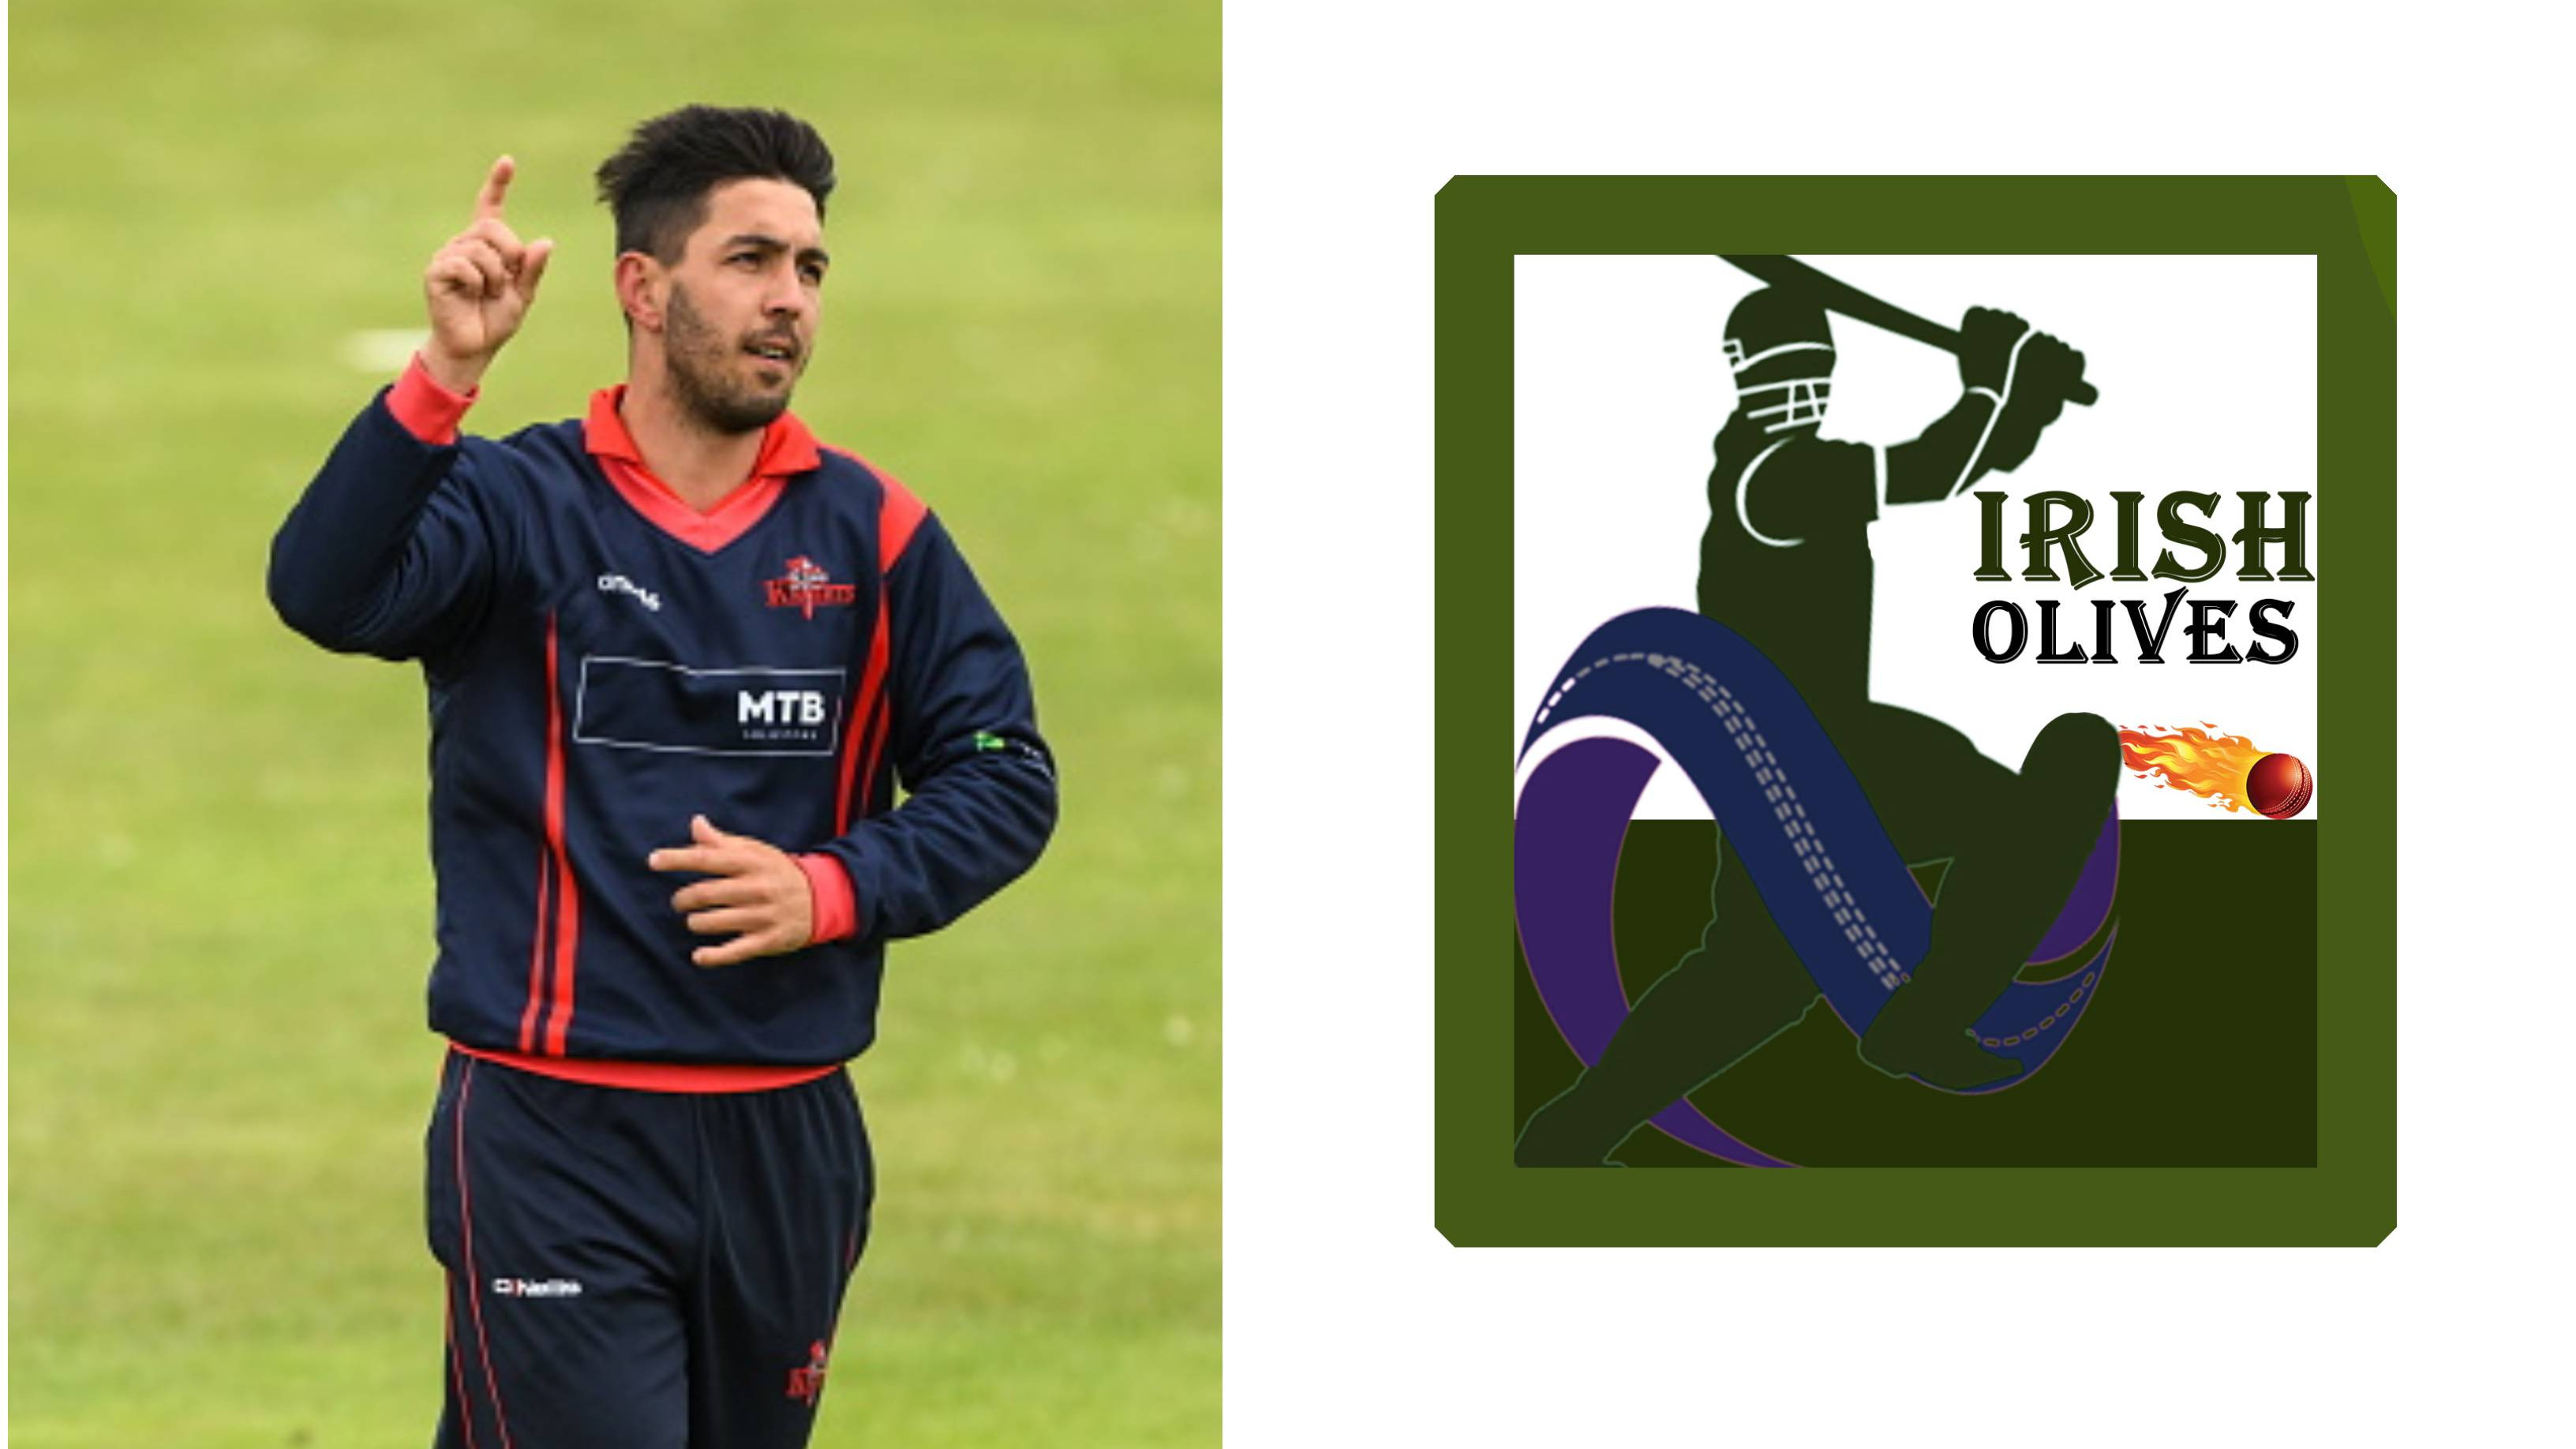 Irish Olives squad unveiled for the inaugural GPCL season, Ruhan Pretorius named captain